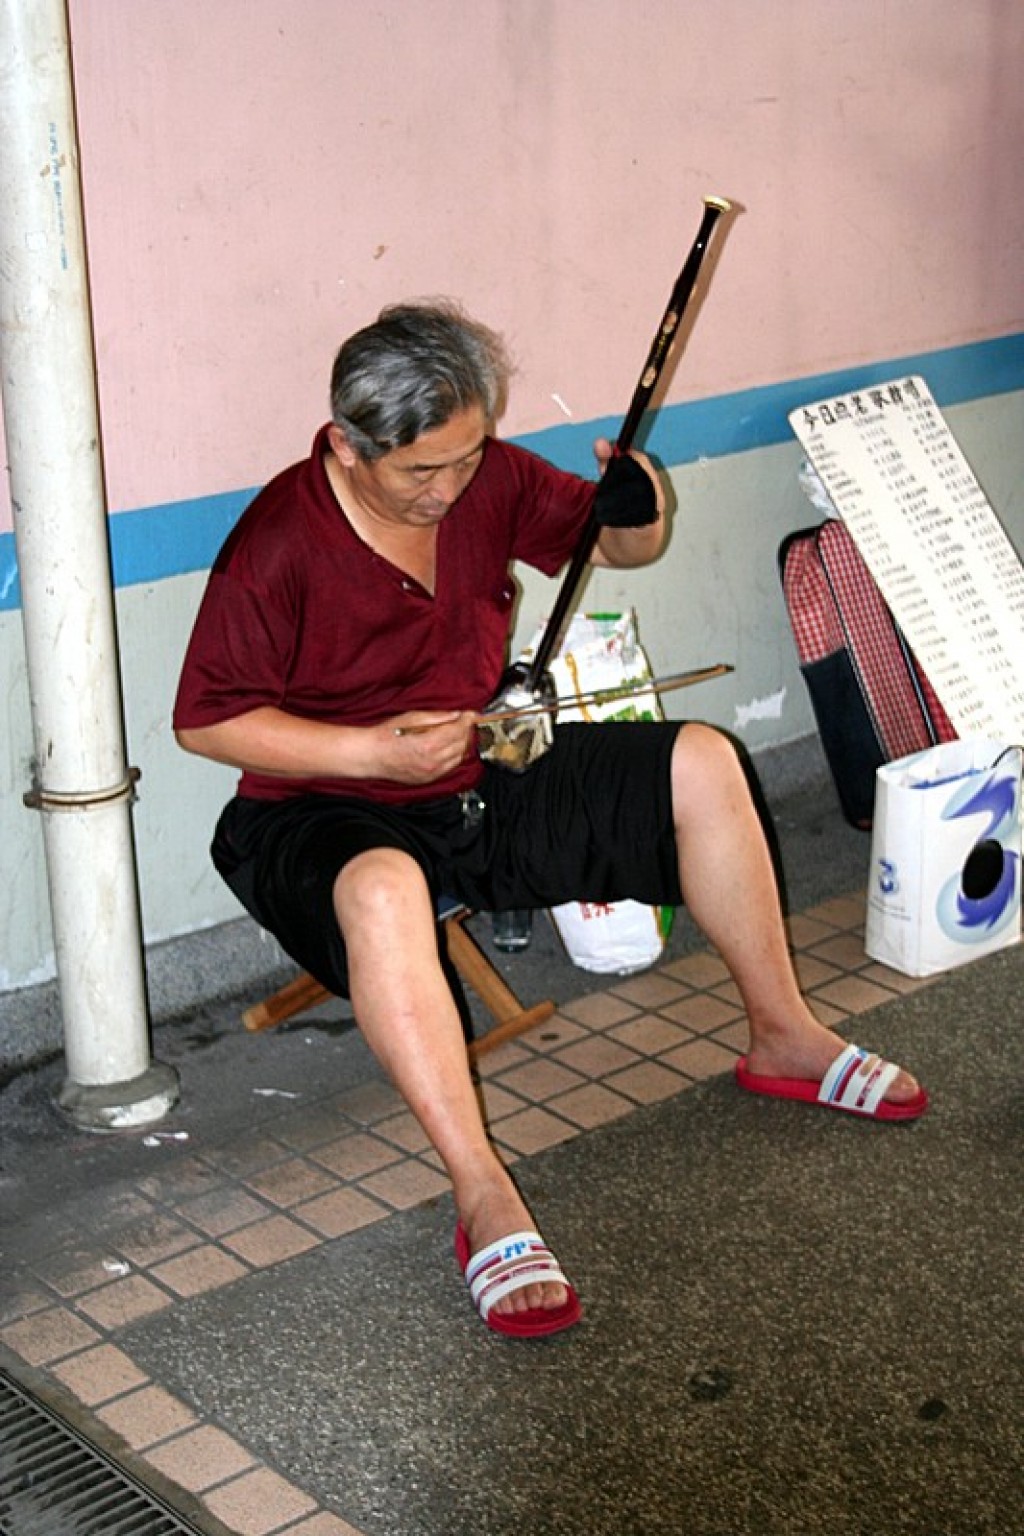 Man playing a traditional instrument in the subway on the way to the tram.